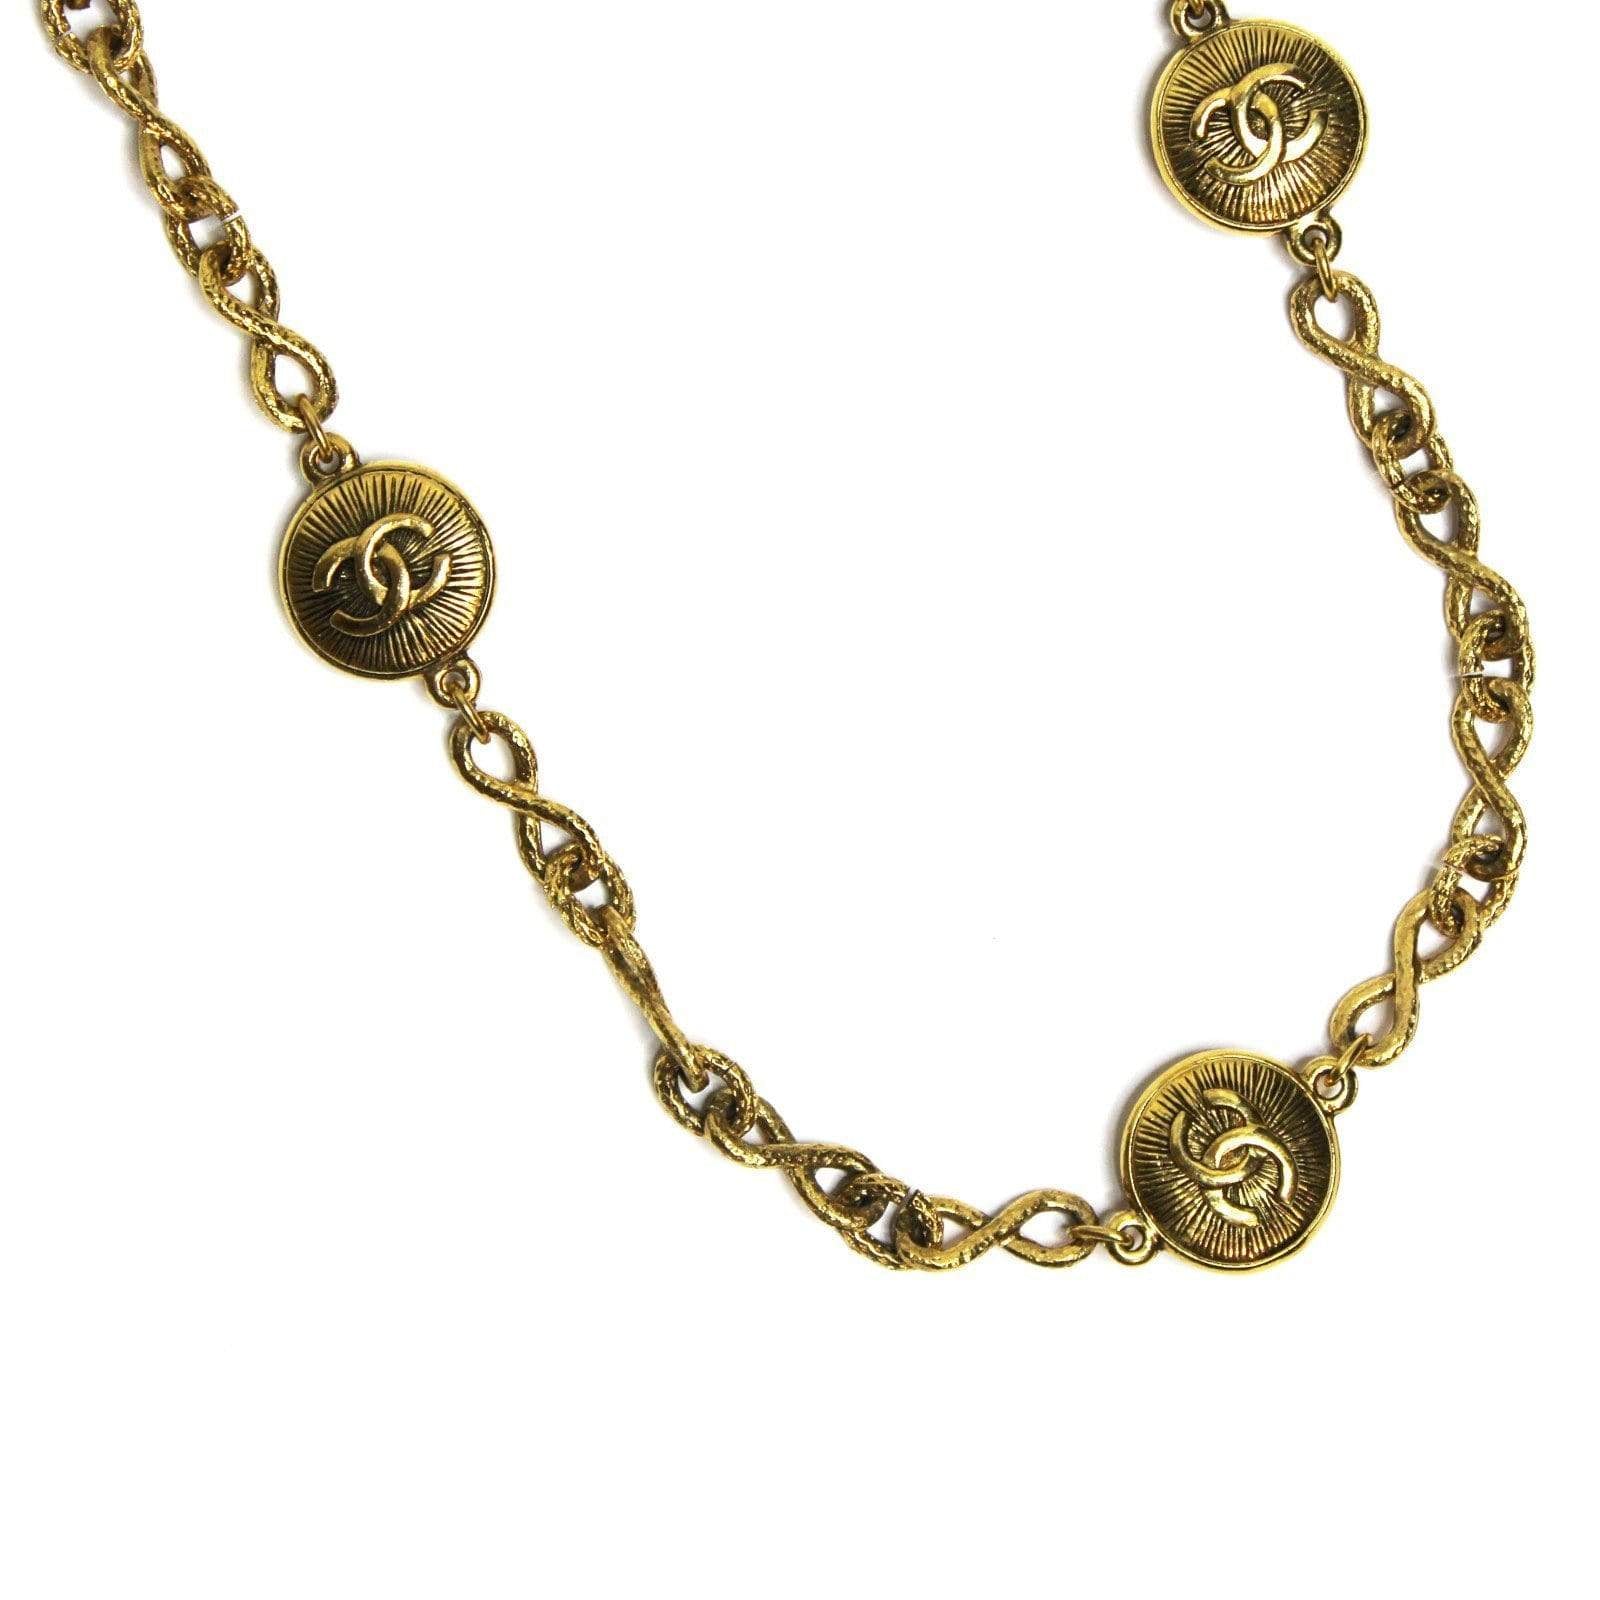 Vintage Chanel Multi Coin Rue Cambon Hang Tag Chain